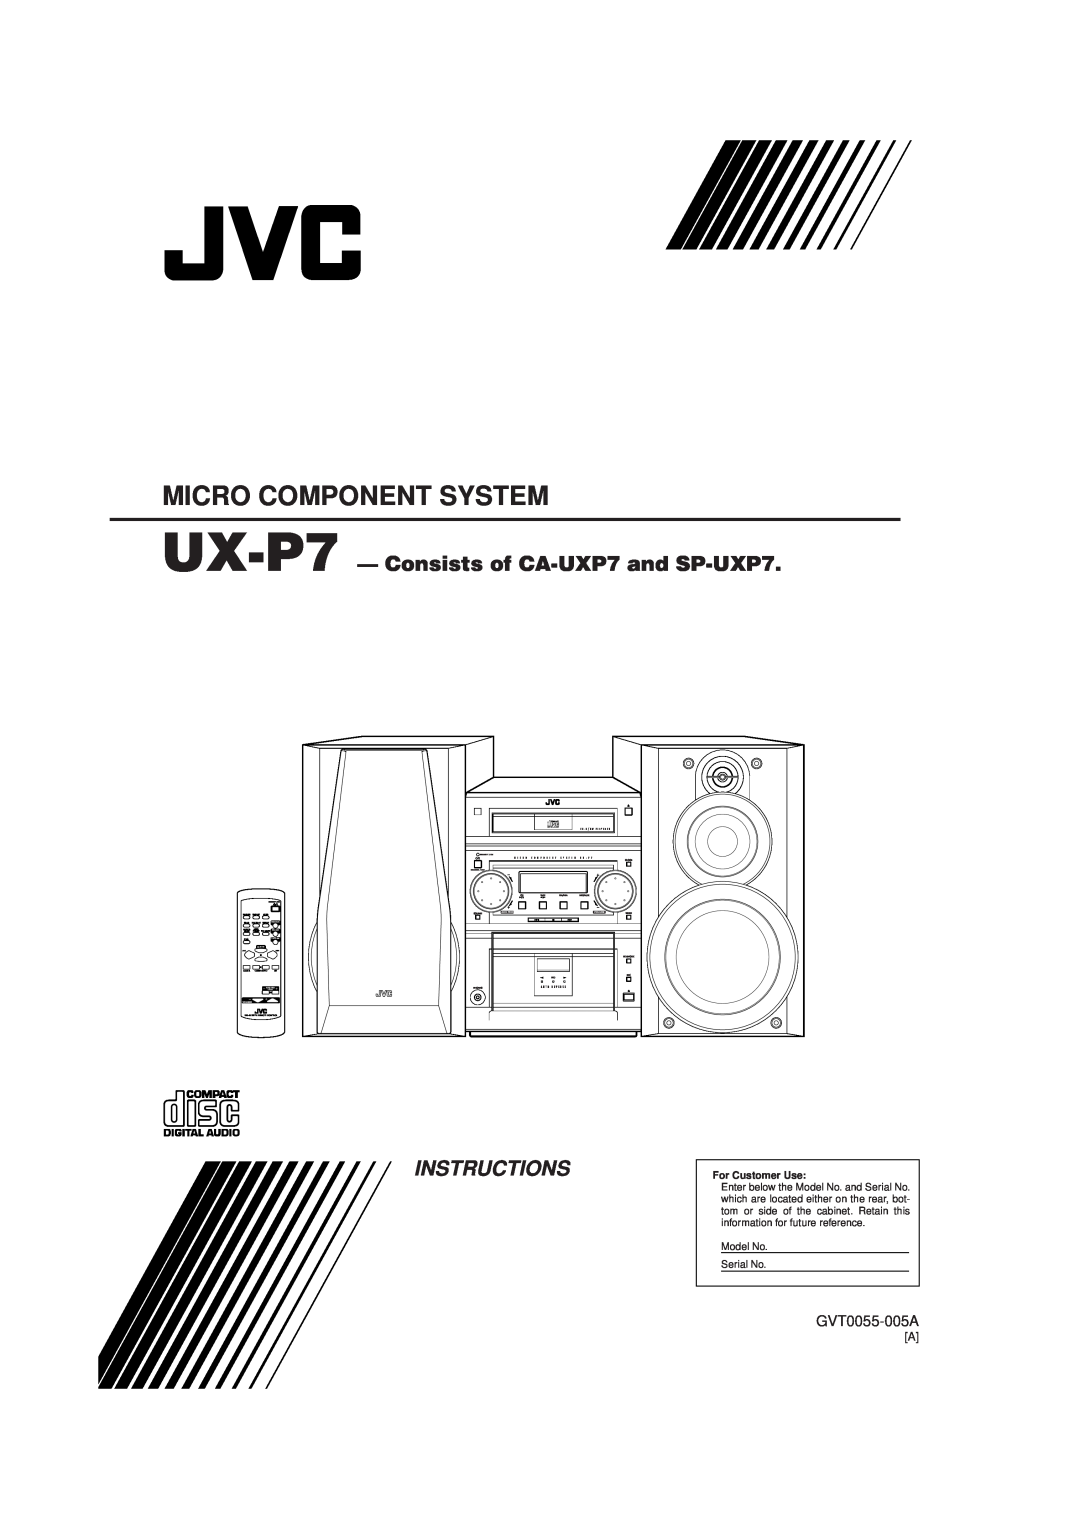 JVC manual UX-P7 - Consists of CA-UXP7and SP-UXP7, GVT0055-005A, Micro Component System, Instructions, For Customer Use 